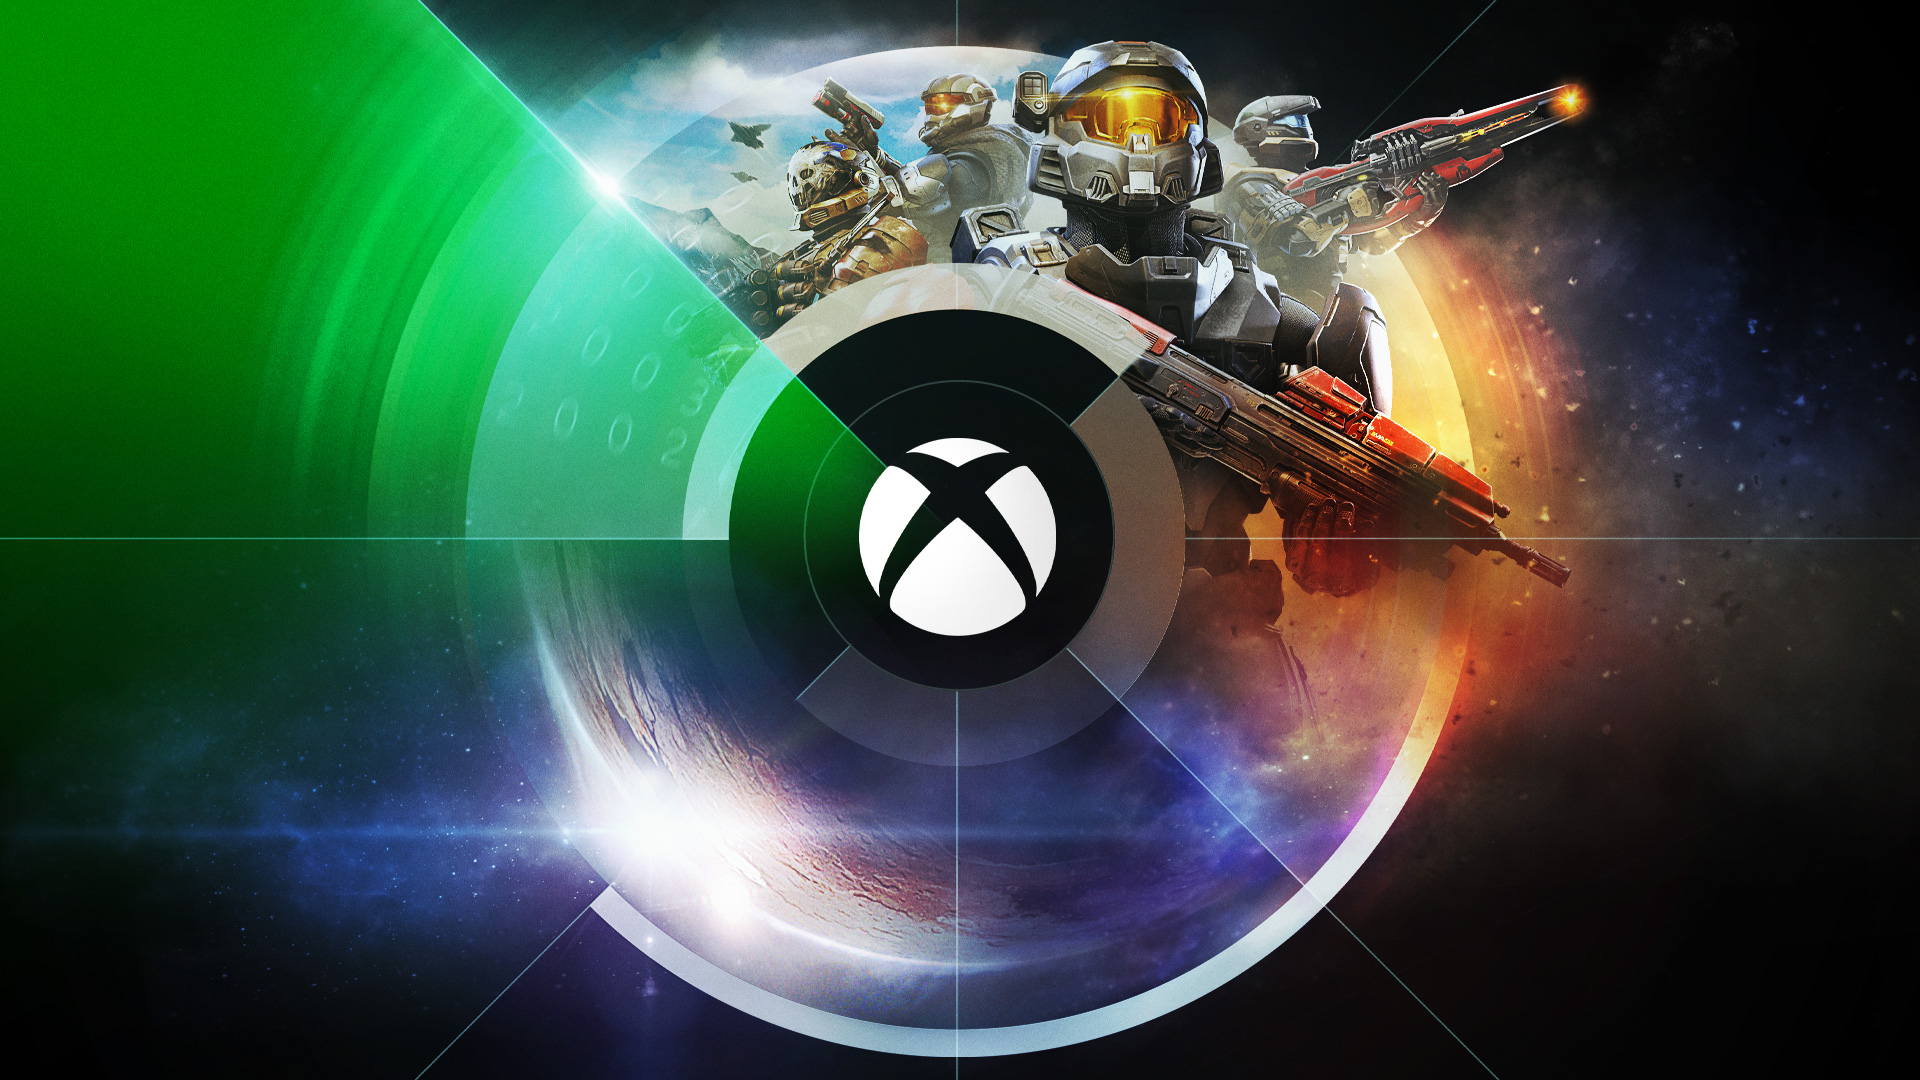 Cool Xbox Wallpapers